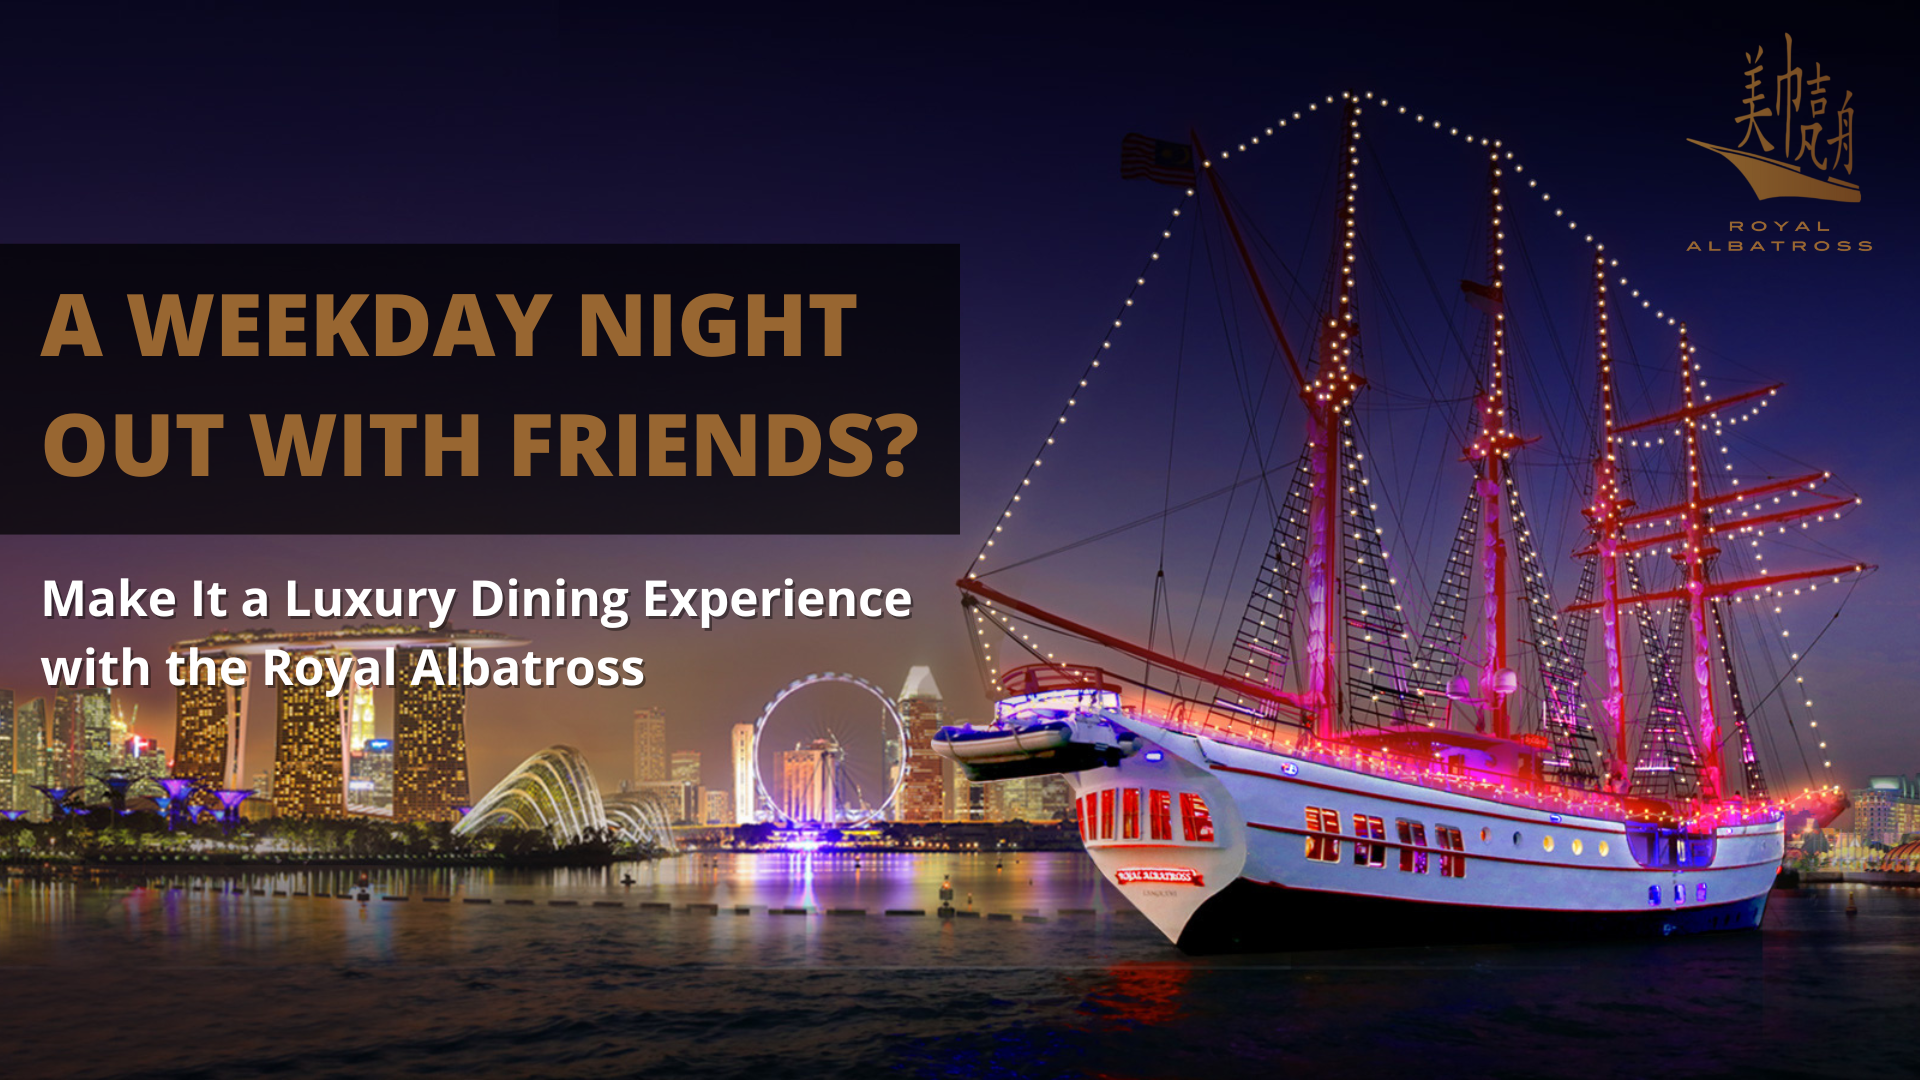 A Weekday Night Out with Friends?